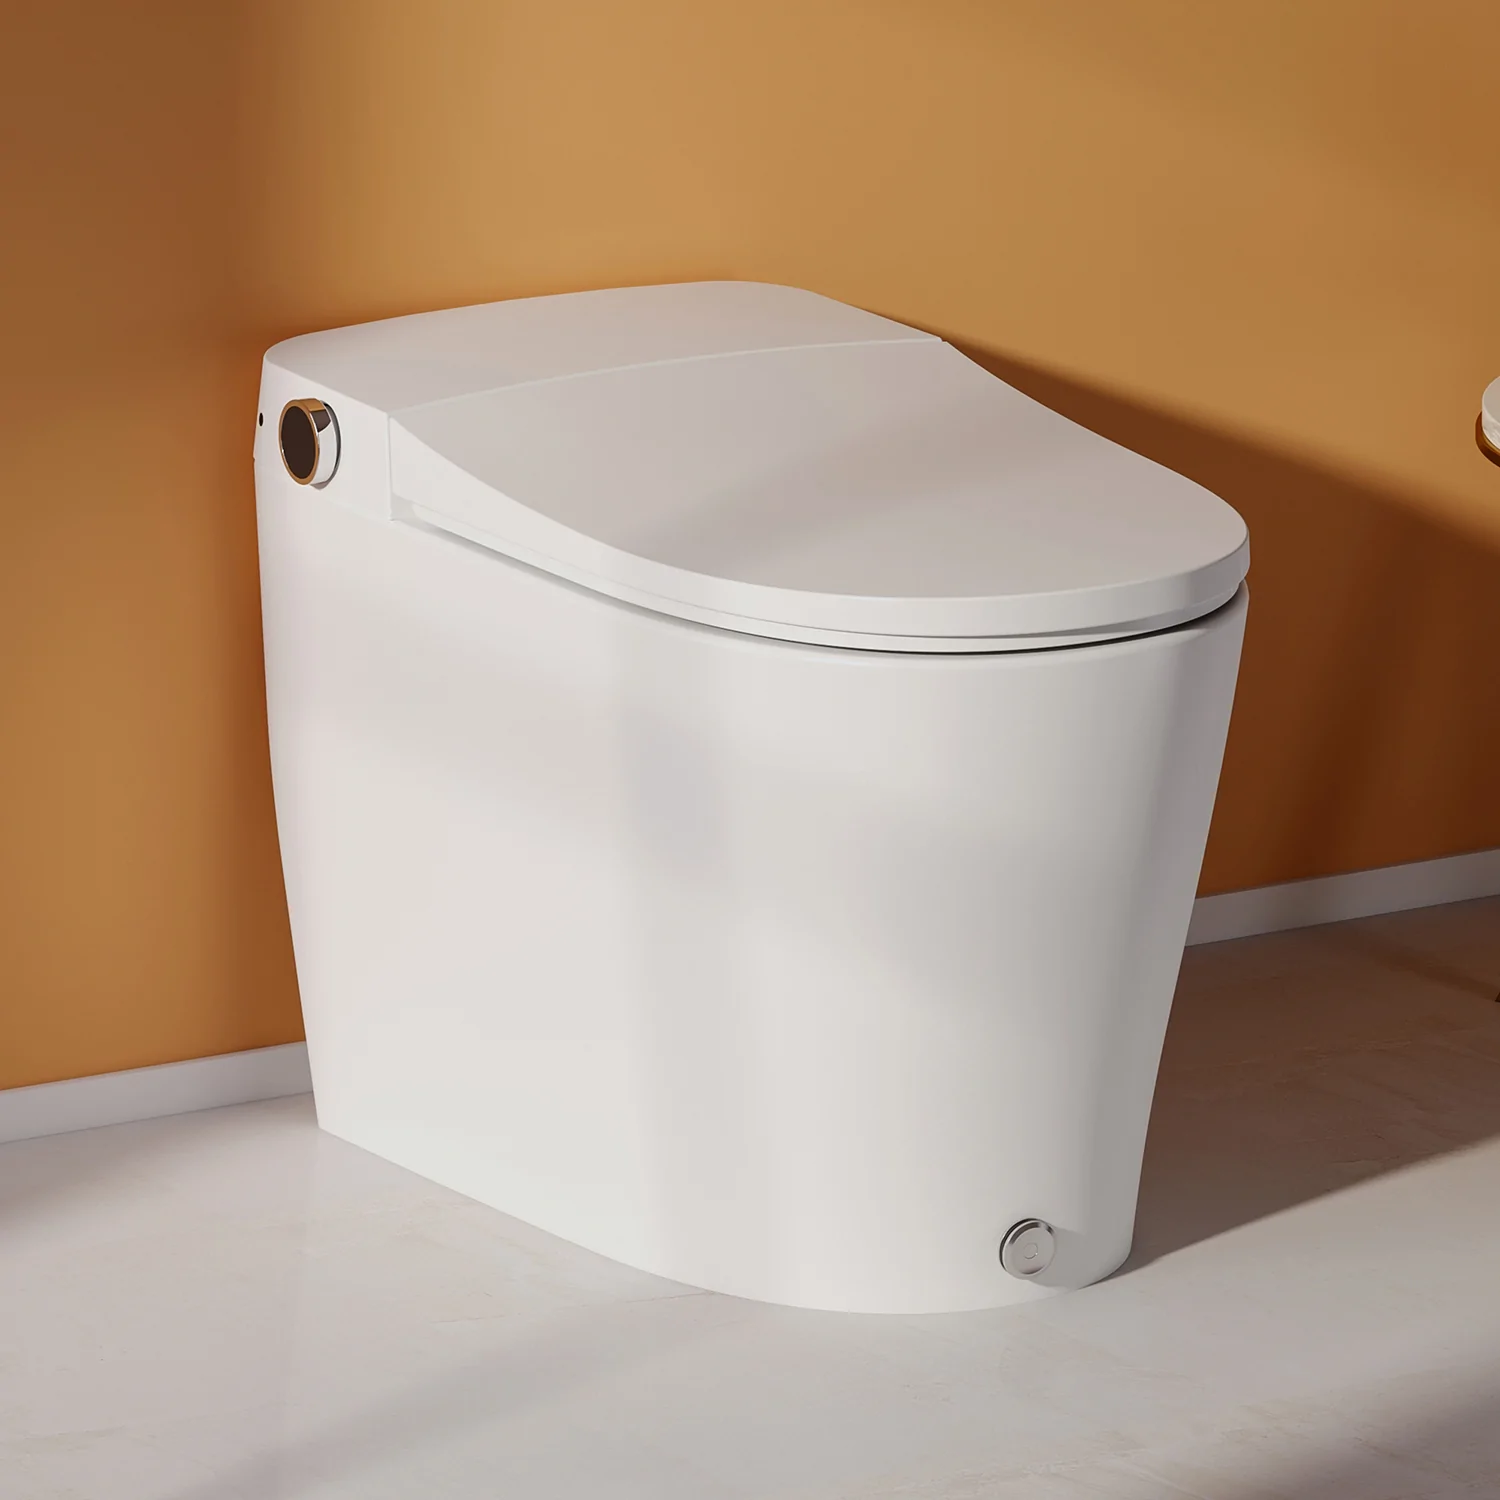 Vovo Stylement ranks as the best overall smart toilet